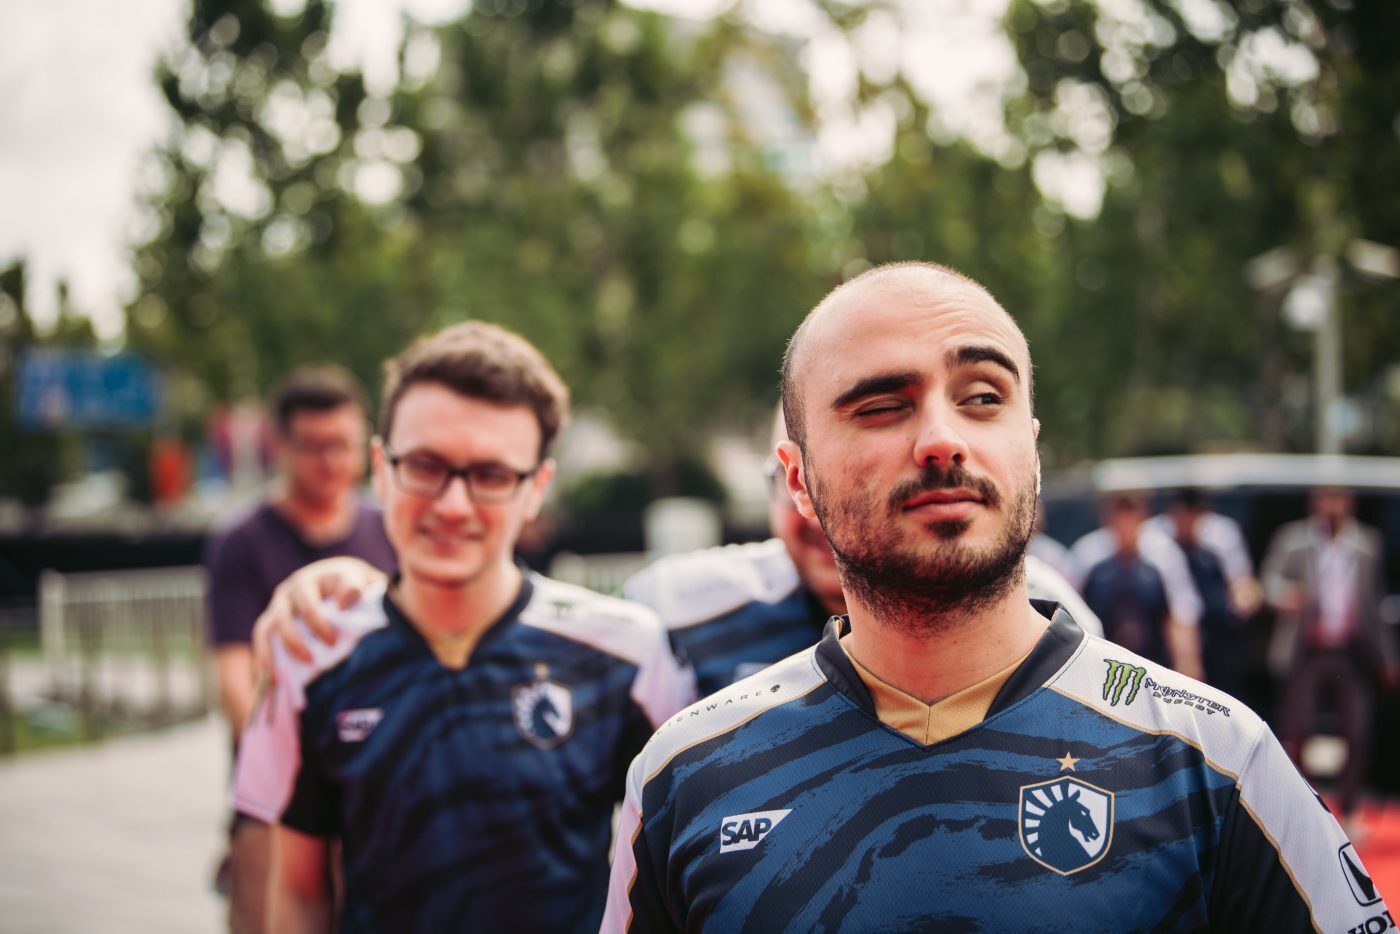 Team Liquid defeat PSG.LGD 2-1 in the TI9 lower bracket finals to advance to the Grand Finals. (Image via Valve)